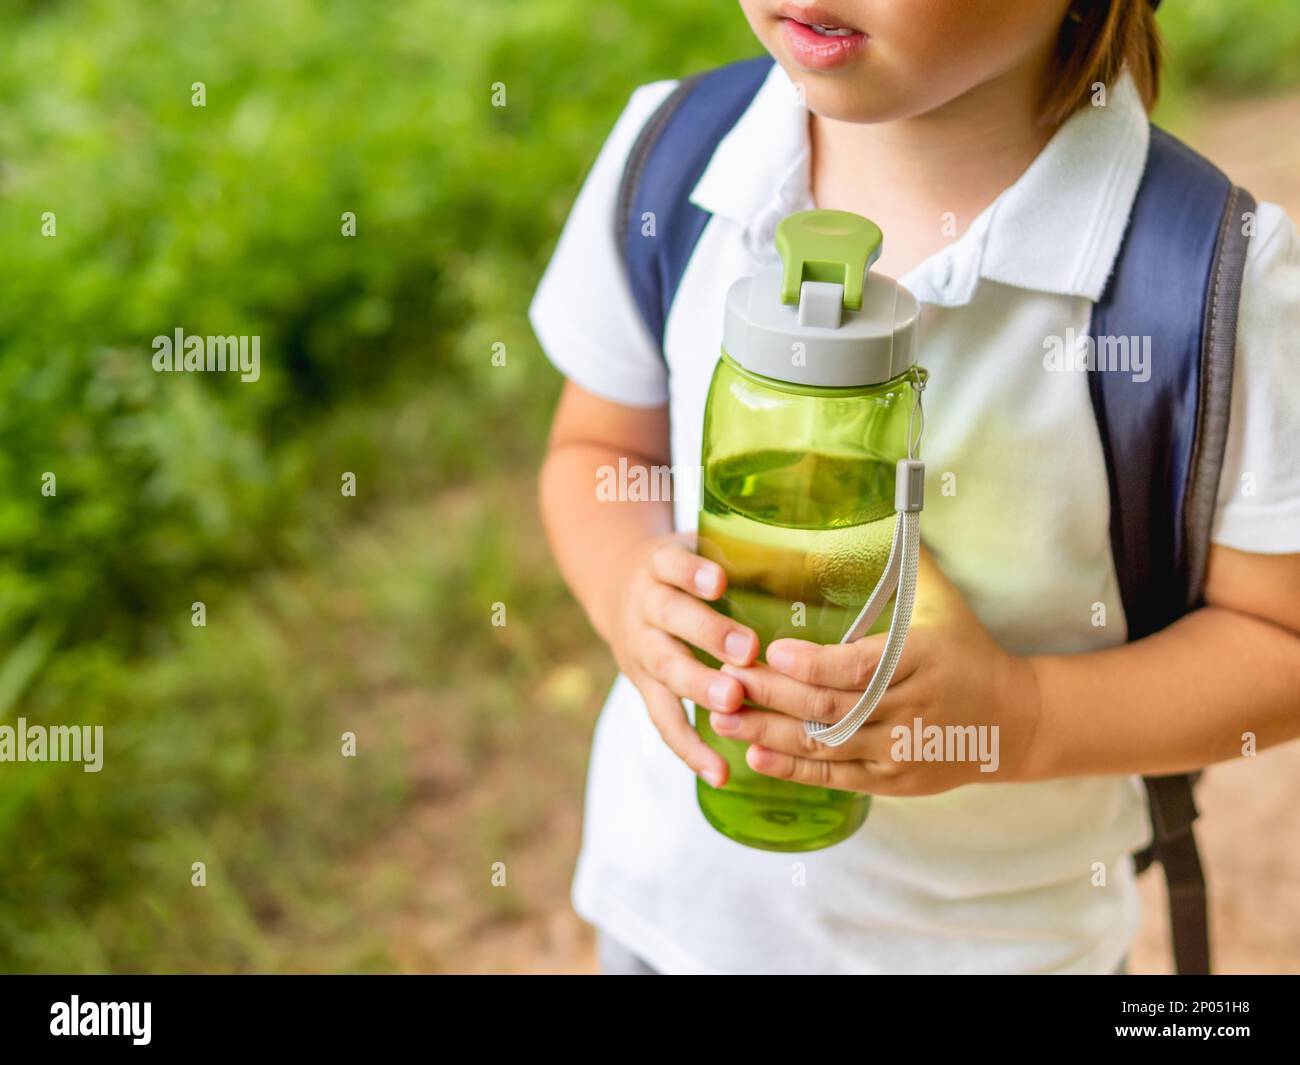 https://c8.alamy.com/comp/2P051H8/thirsty-boy-holds-in-hands-reusable-green-bottle-with-pure-water-summer-outdoor-recreation-healthy-lifestyle-2P051H8.jpg